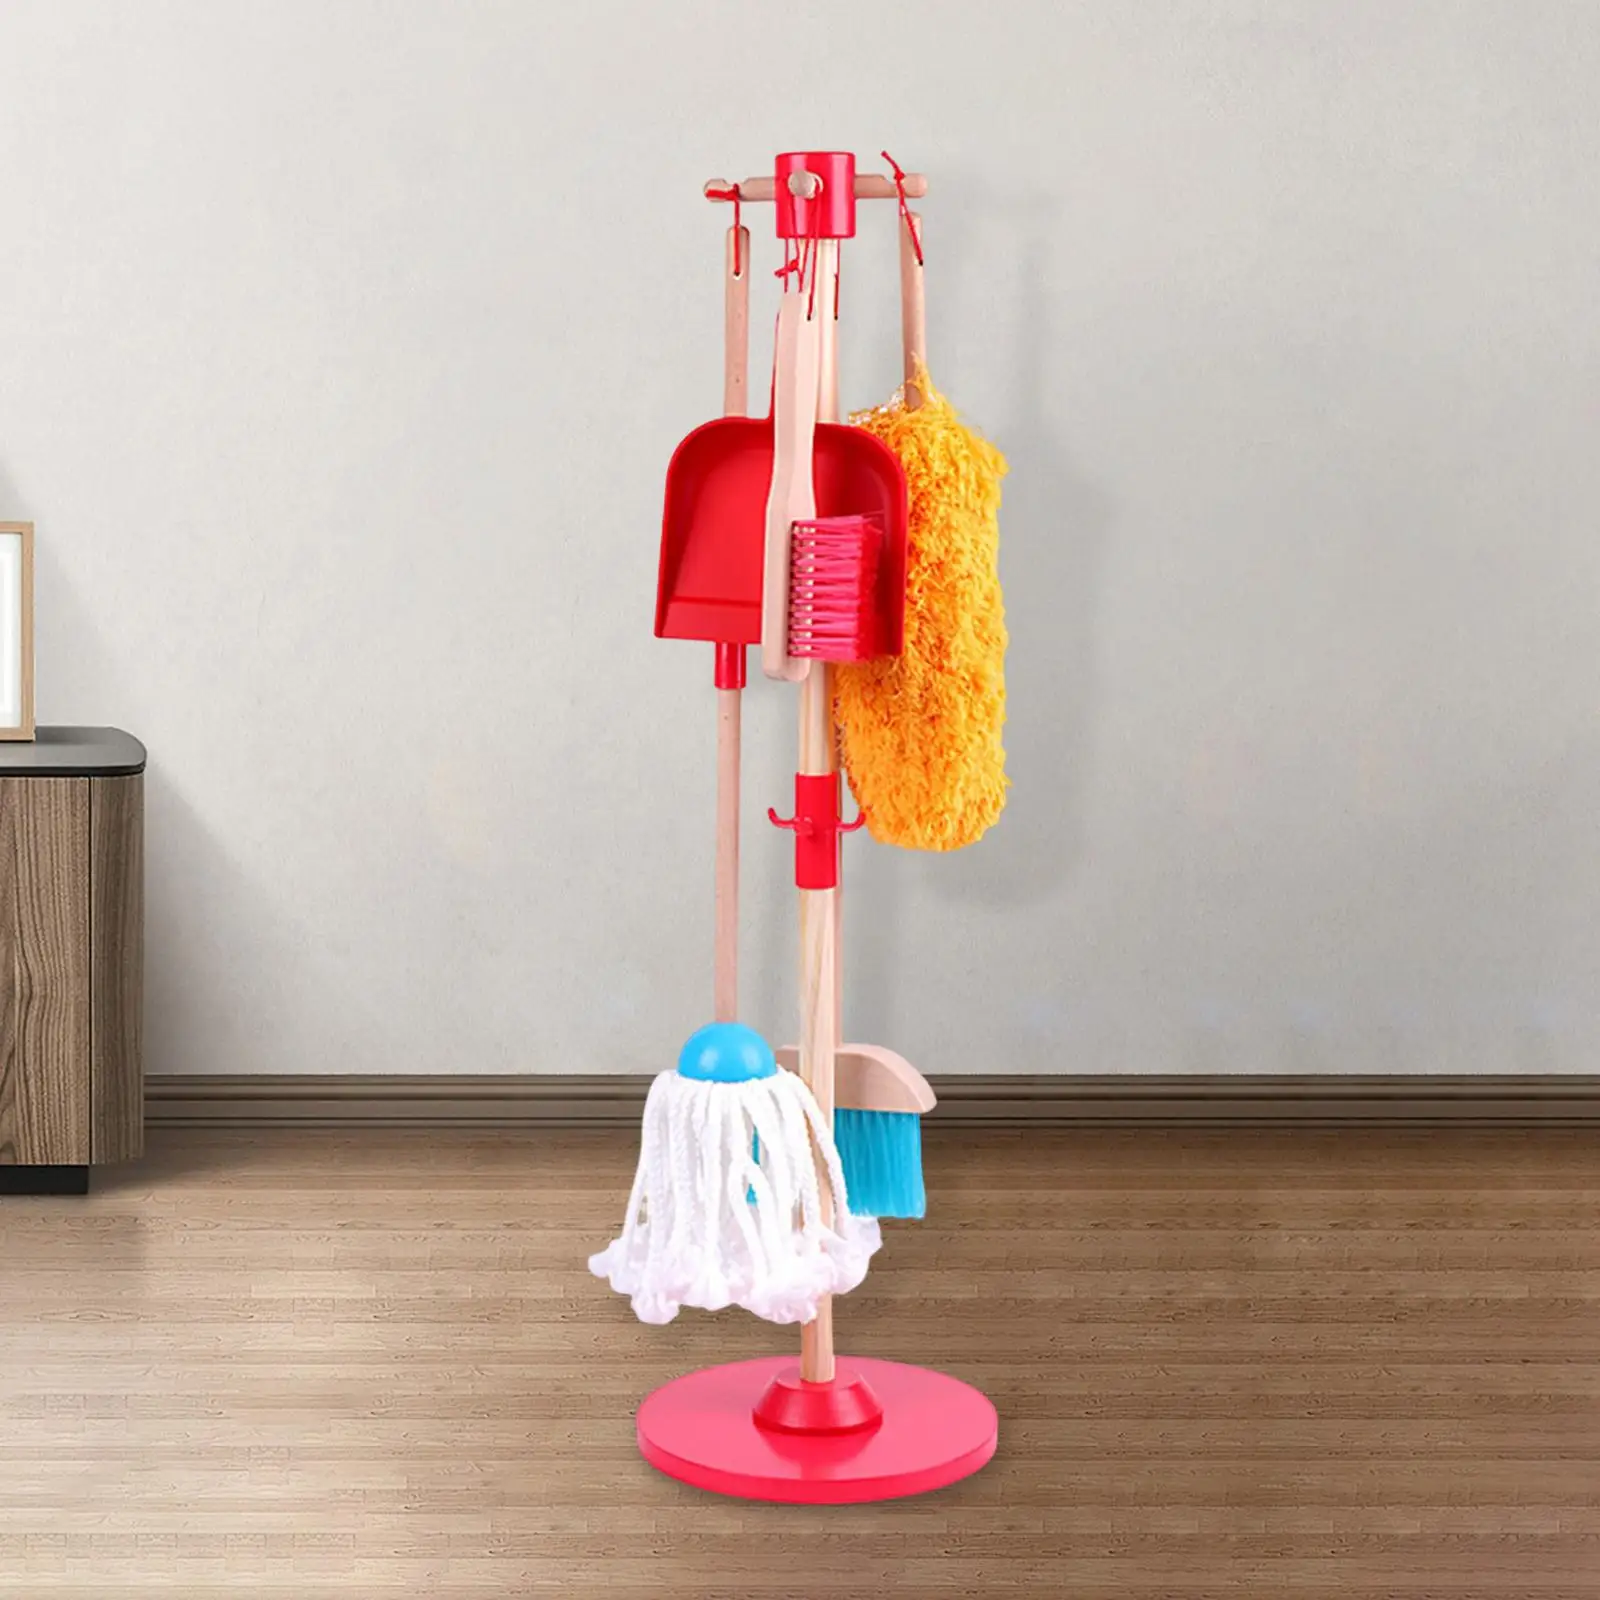 6Pcs Chidlren Housekeeping Cleaning Set Pretend Play Toy Accessory ,Designed for Children to Learn How to Do Housework